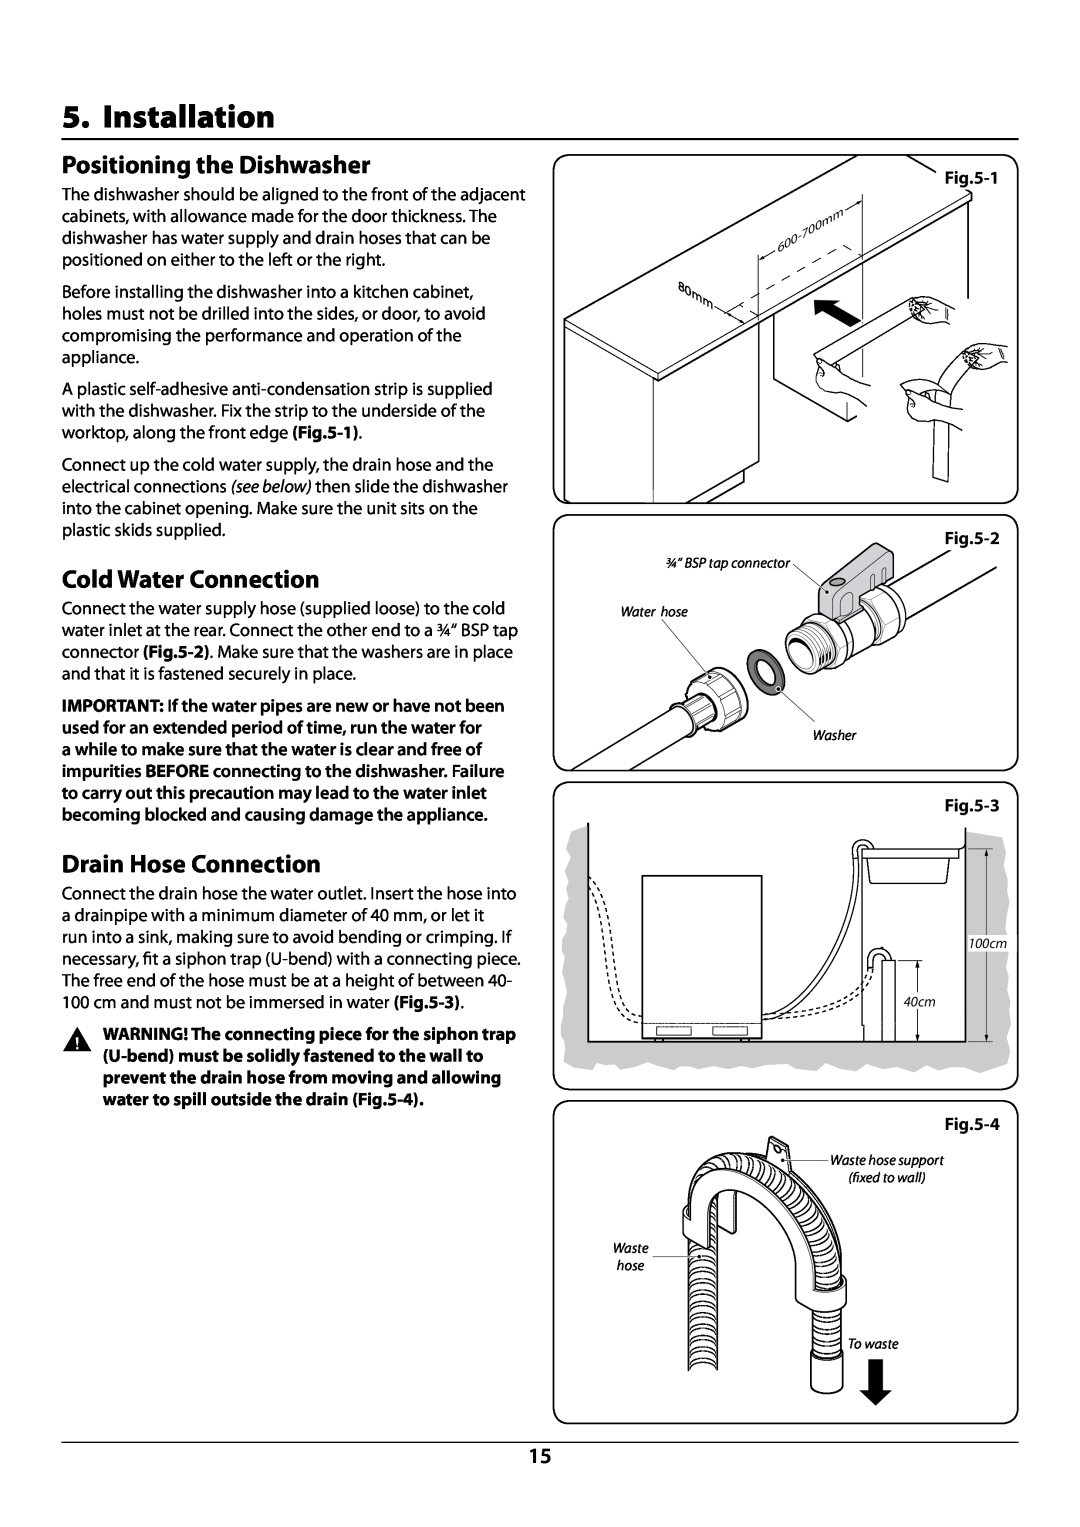 Rangemaster RDW6012FI manual Installation, Positioning the Dishwasher, Cold Water Connection, Drain Hose Connection, 4 